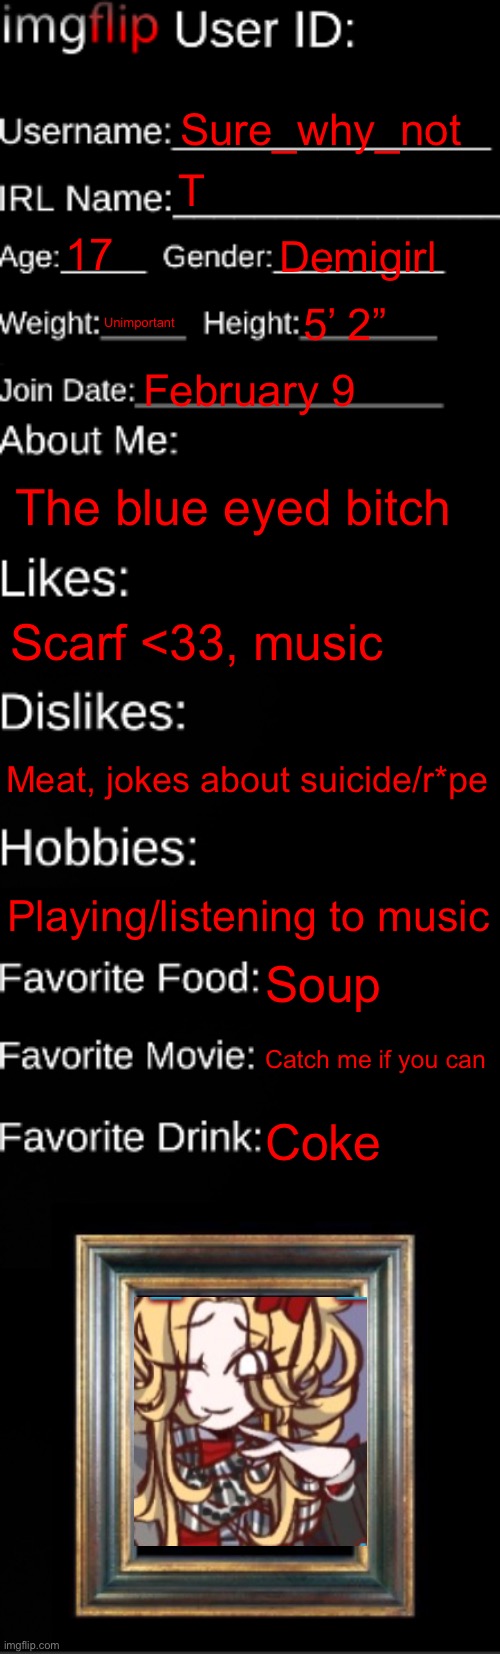 imgflip ID Card | Sure_why_not; T; 17; Demigirl; Unimportant; 5’ 2”; February 9; The blue eyed bitch; Scarf <33, music; Meat, jokes about suicide/r*pe; Playing/listening to music; Soup; Catch me if you can; Coke | image tagged in imgflip id card | made w/ Imgflip meme maker